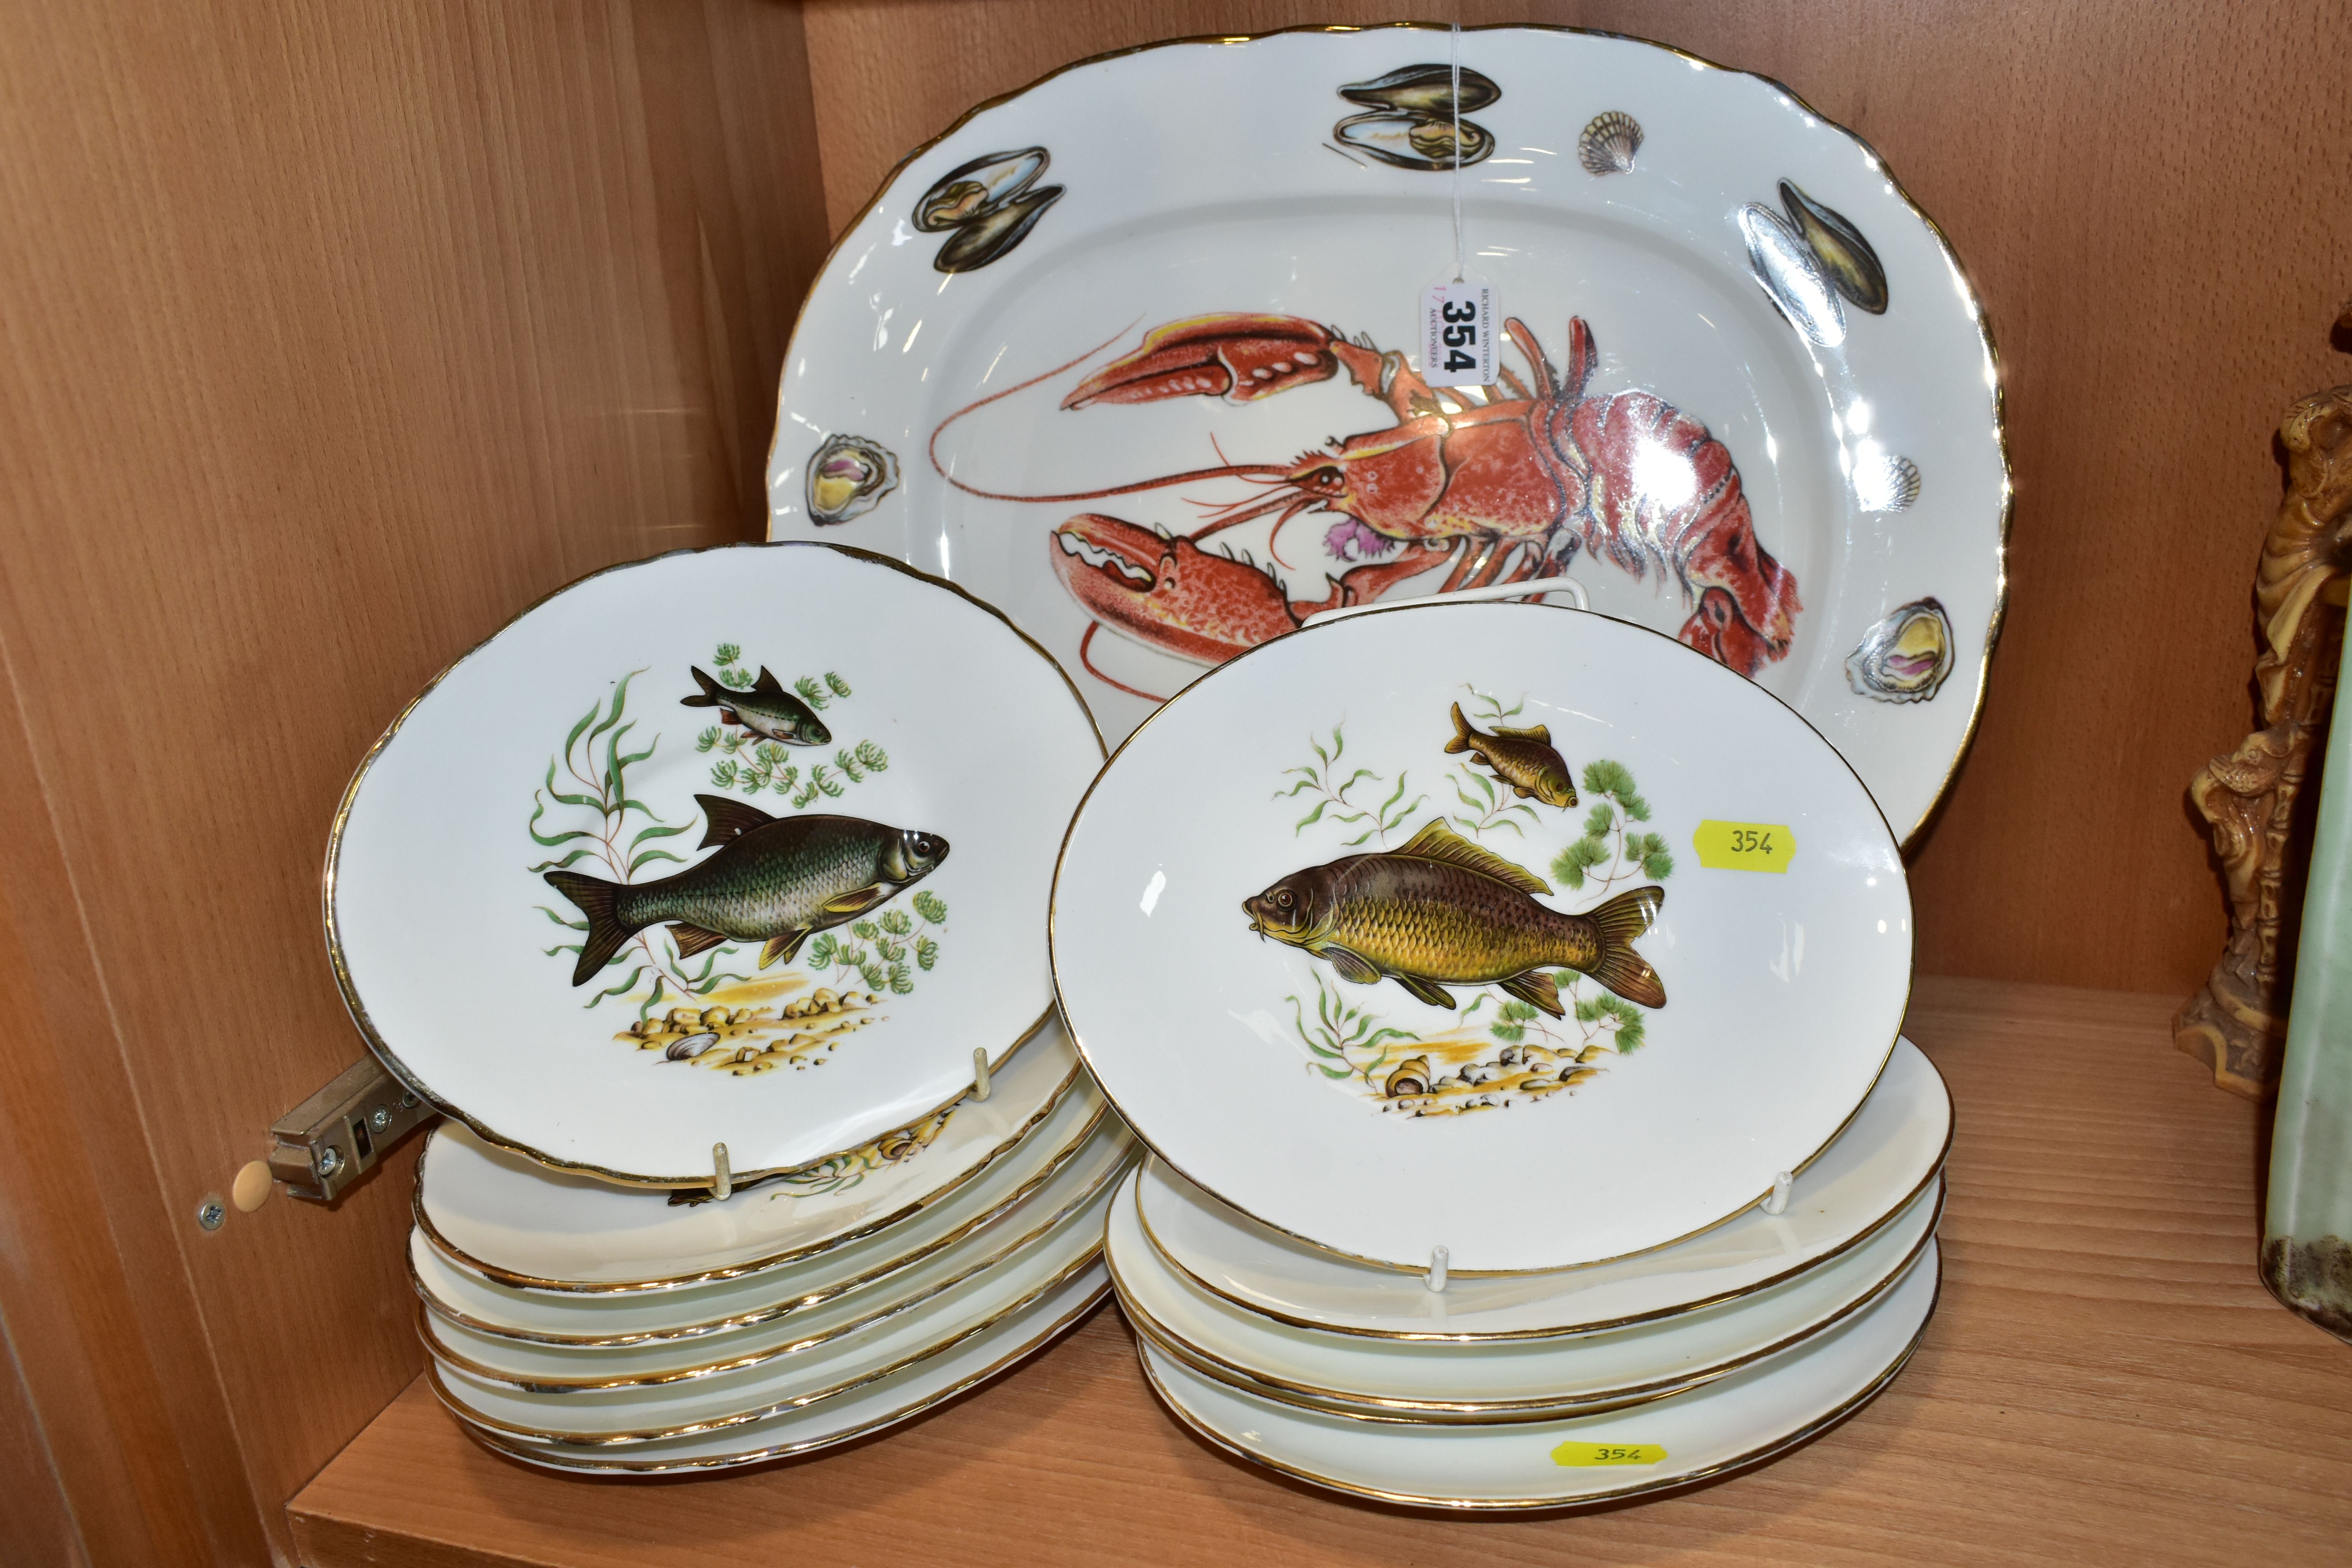 TWELVE PIECES OF AYNSLEY BONE CHINA PRINTED WITH FISH AND SHELLFISH DESIGNS, comprising an oval